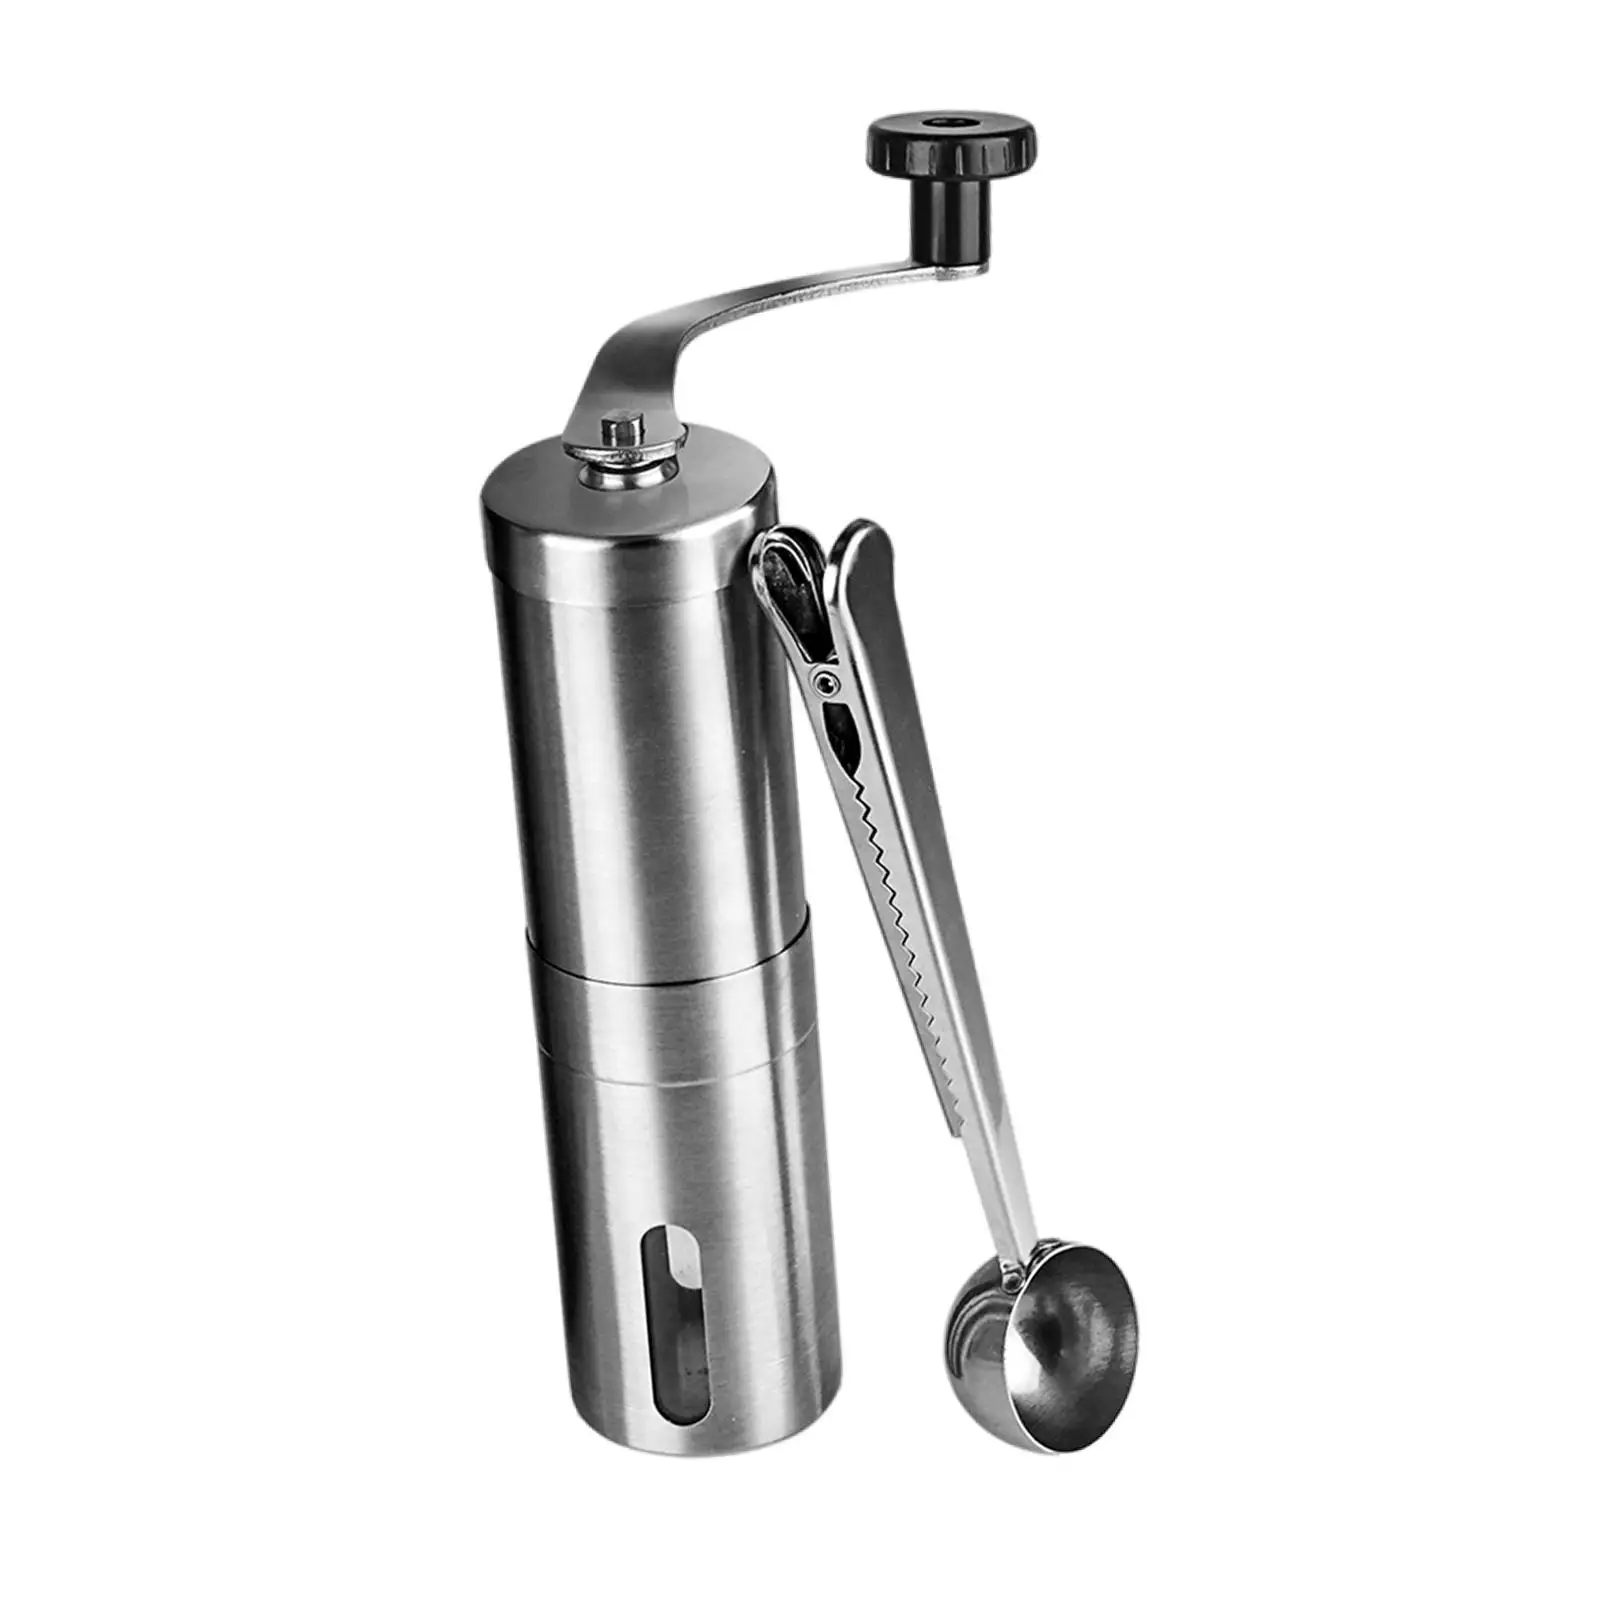 Manual Coffee Grinder, Hand Grinder Coffee Bean Grinder for Travel Picnic Office